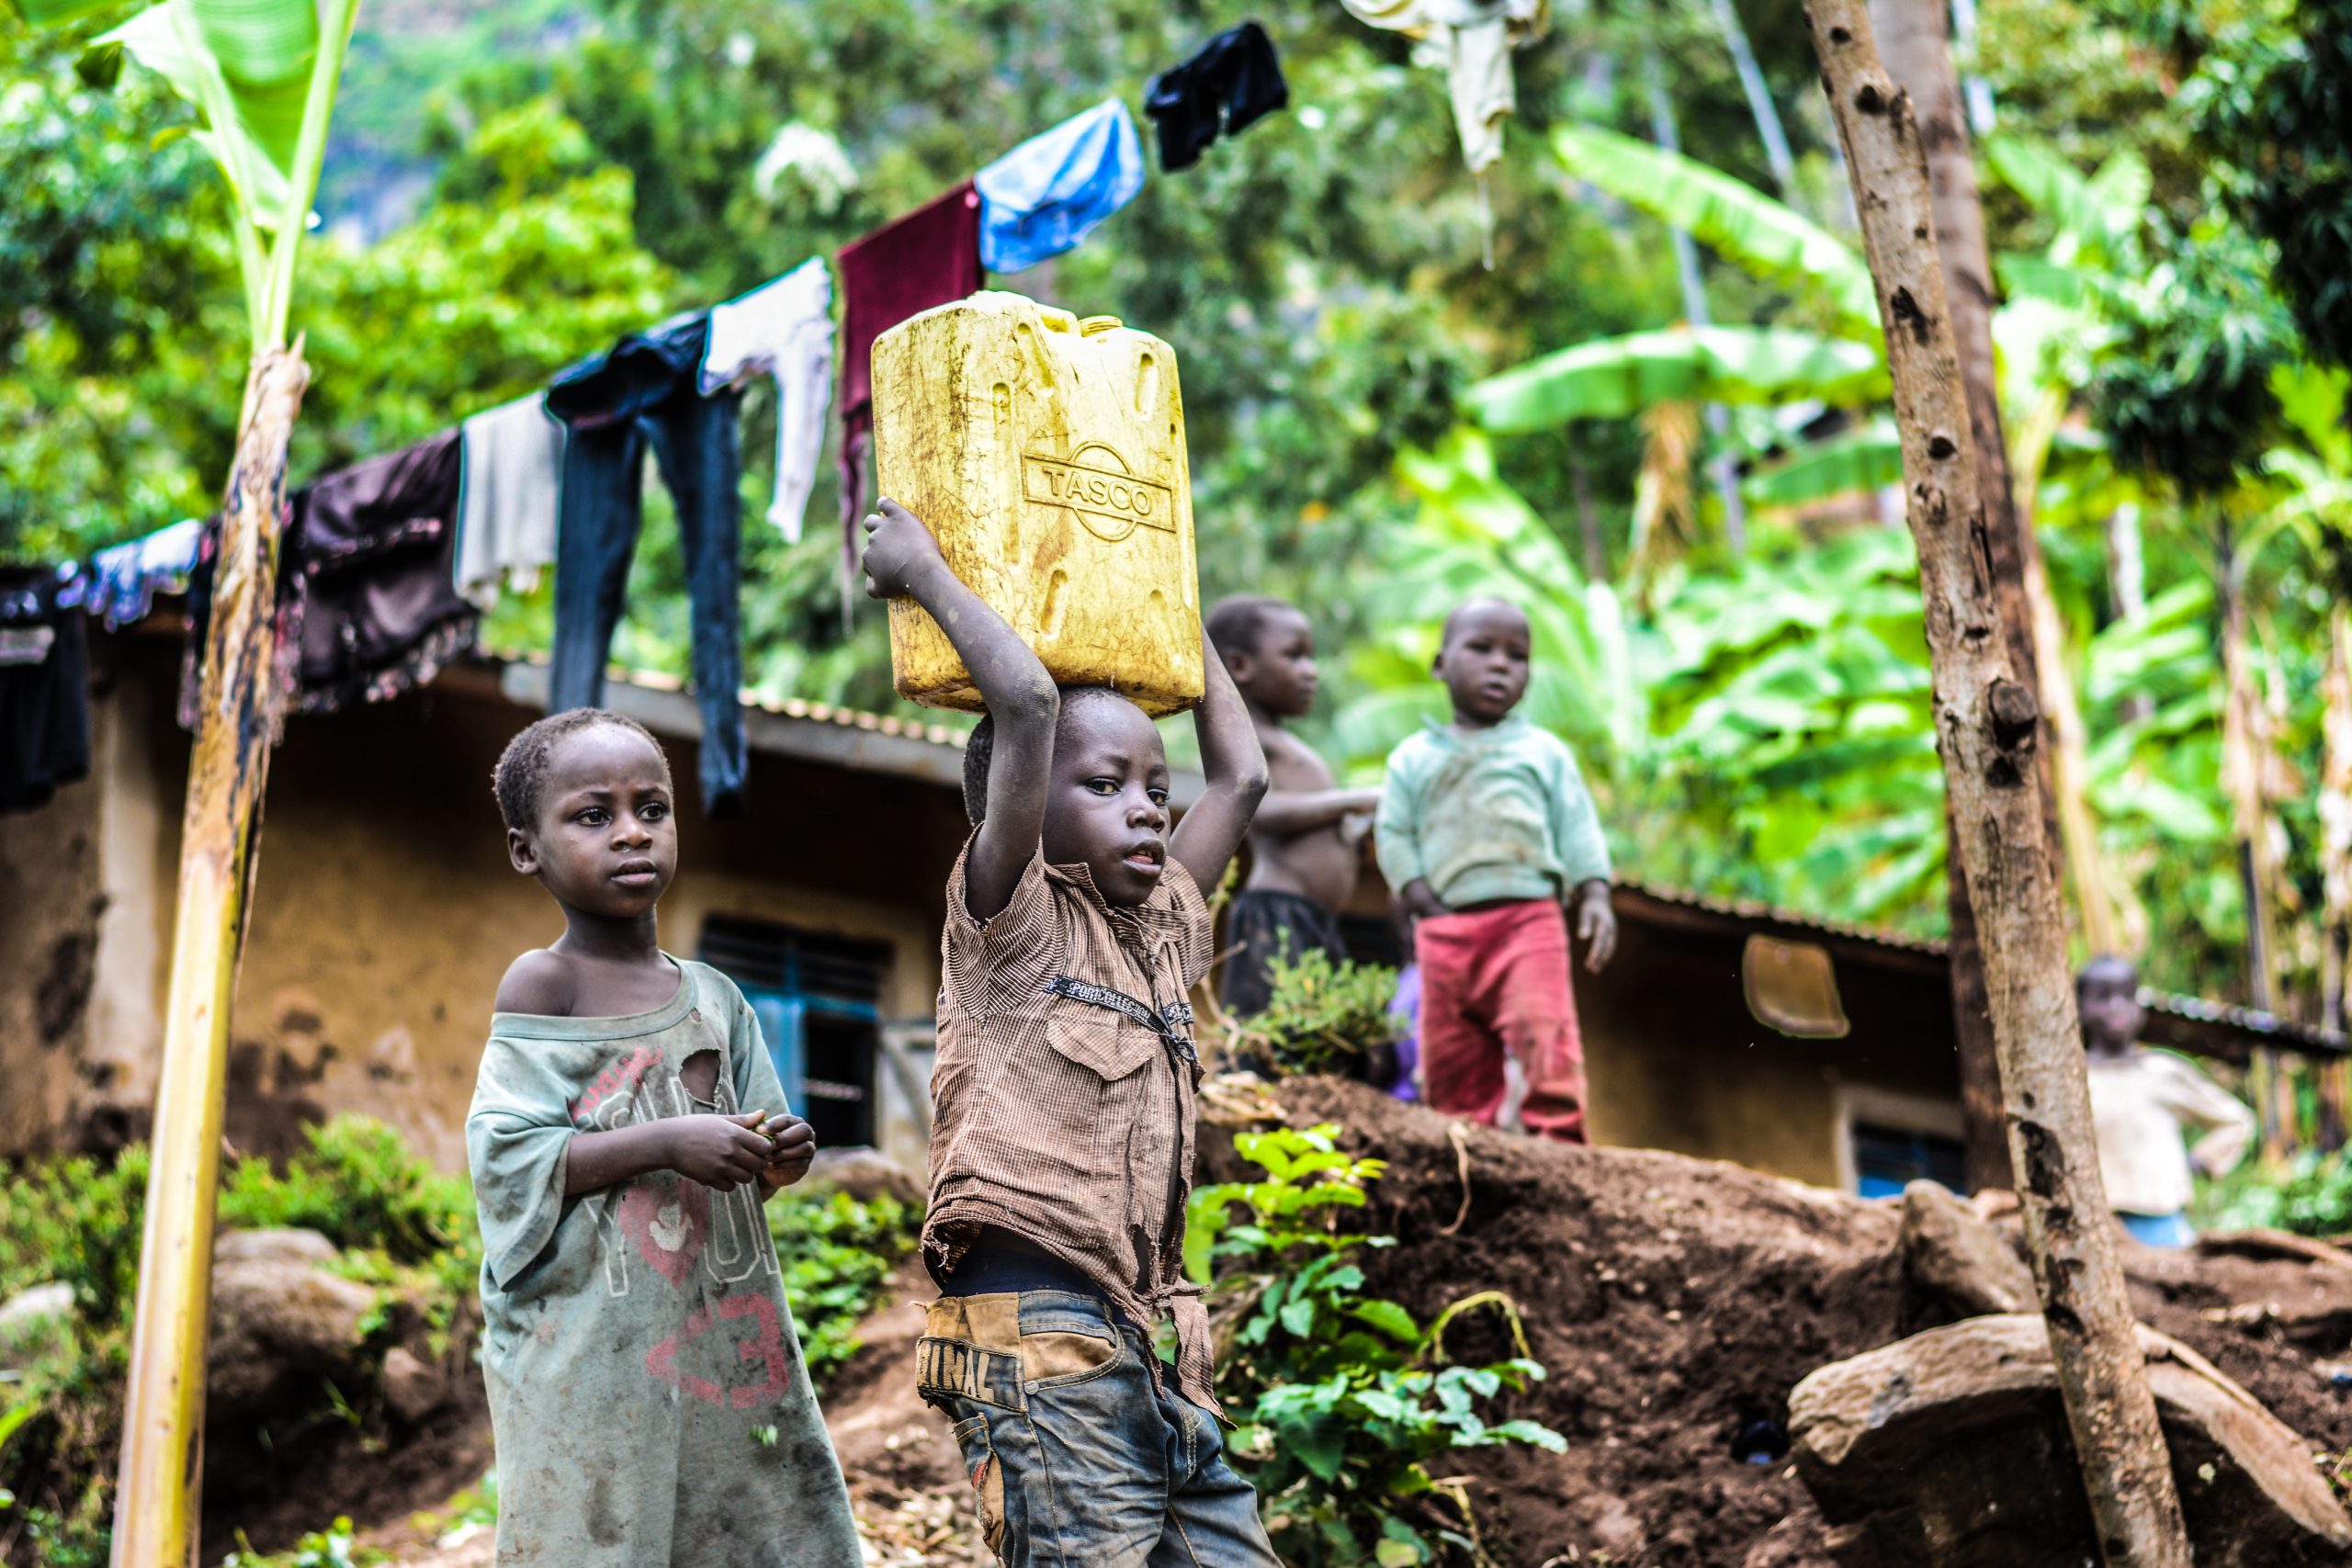  Integration into global value chains can reduce child labour